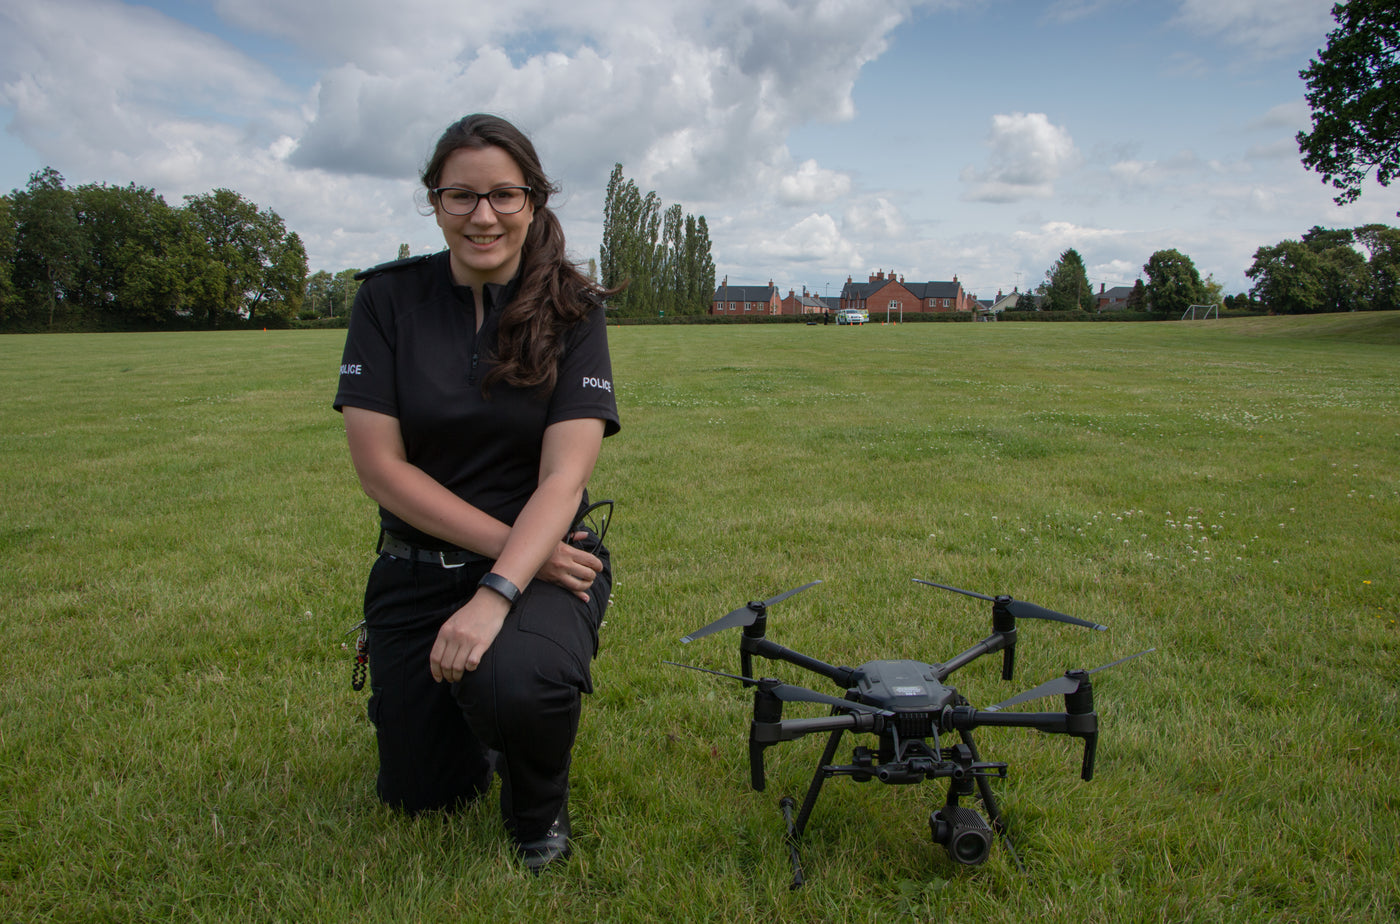 Derbyshire Police's First Female Drone Pilot Wants To Fight Crime And Inspire Others